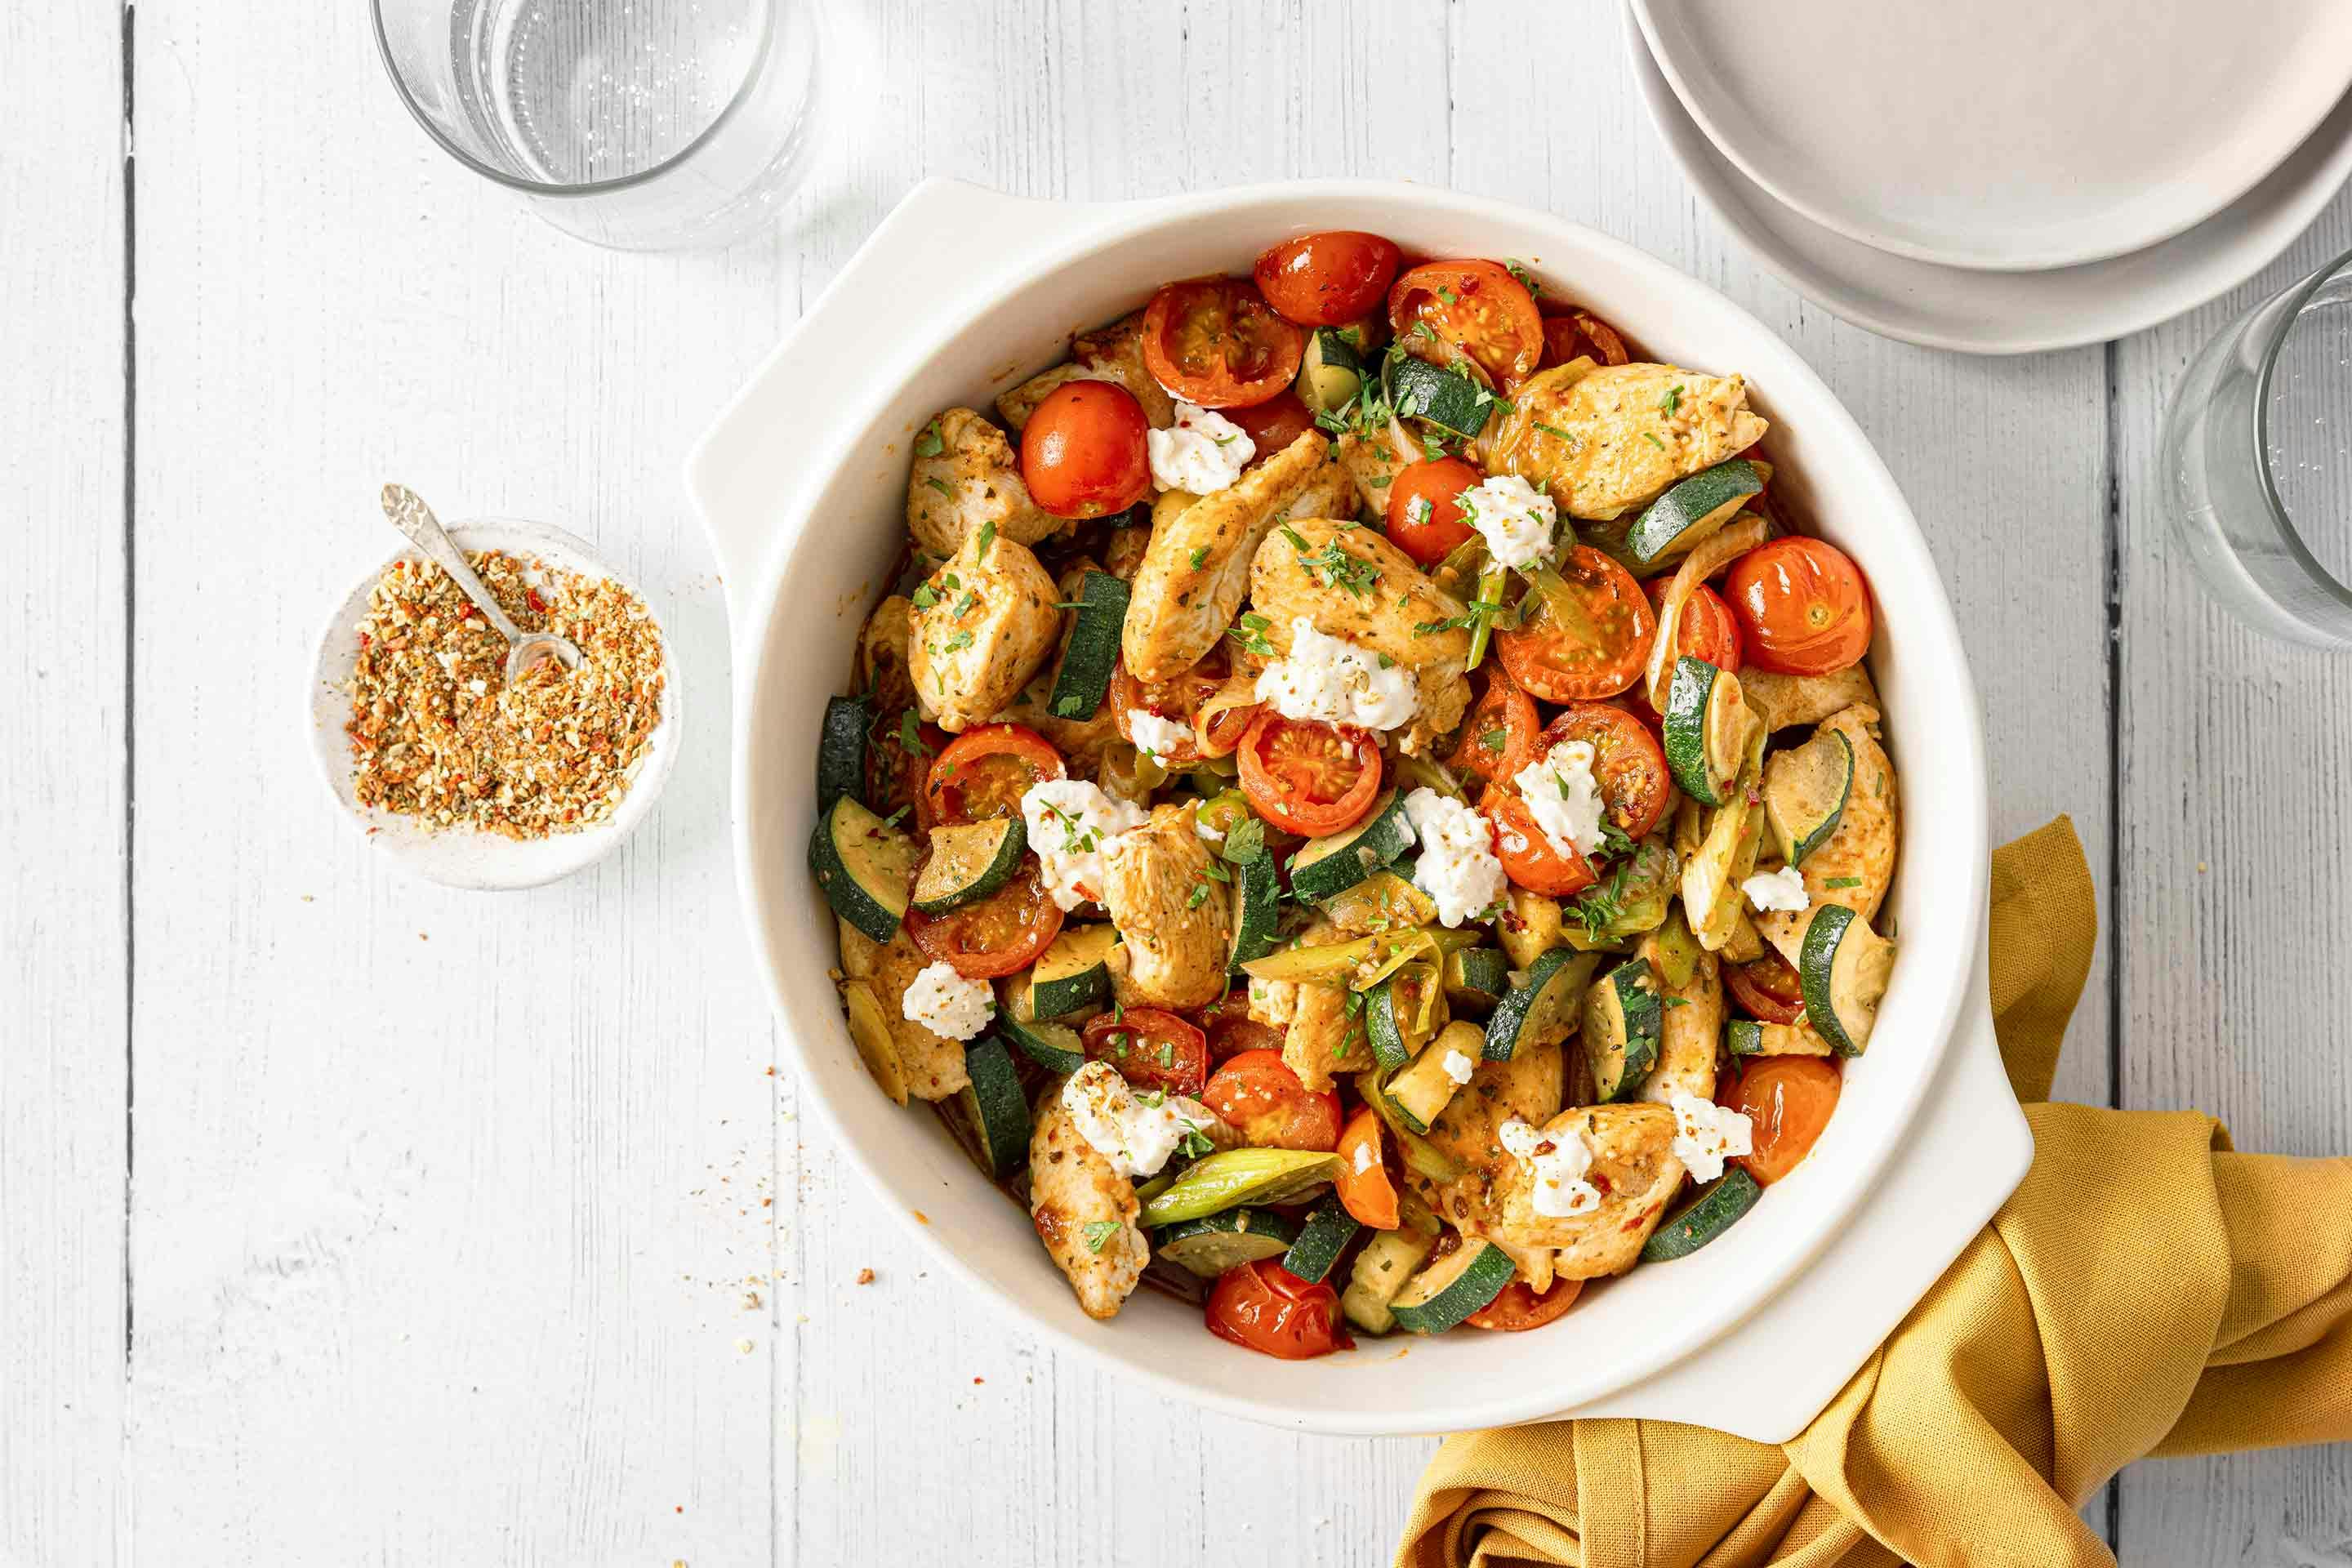 The Kotányi Quick & Easy Zucchini Pan with Chicken is the perfect light meal for every occasion.